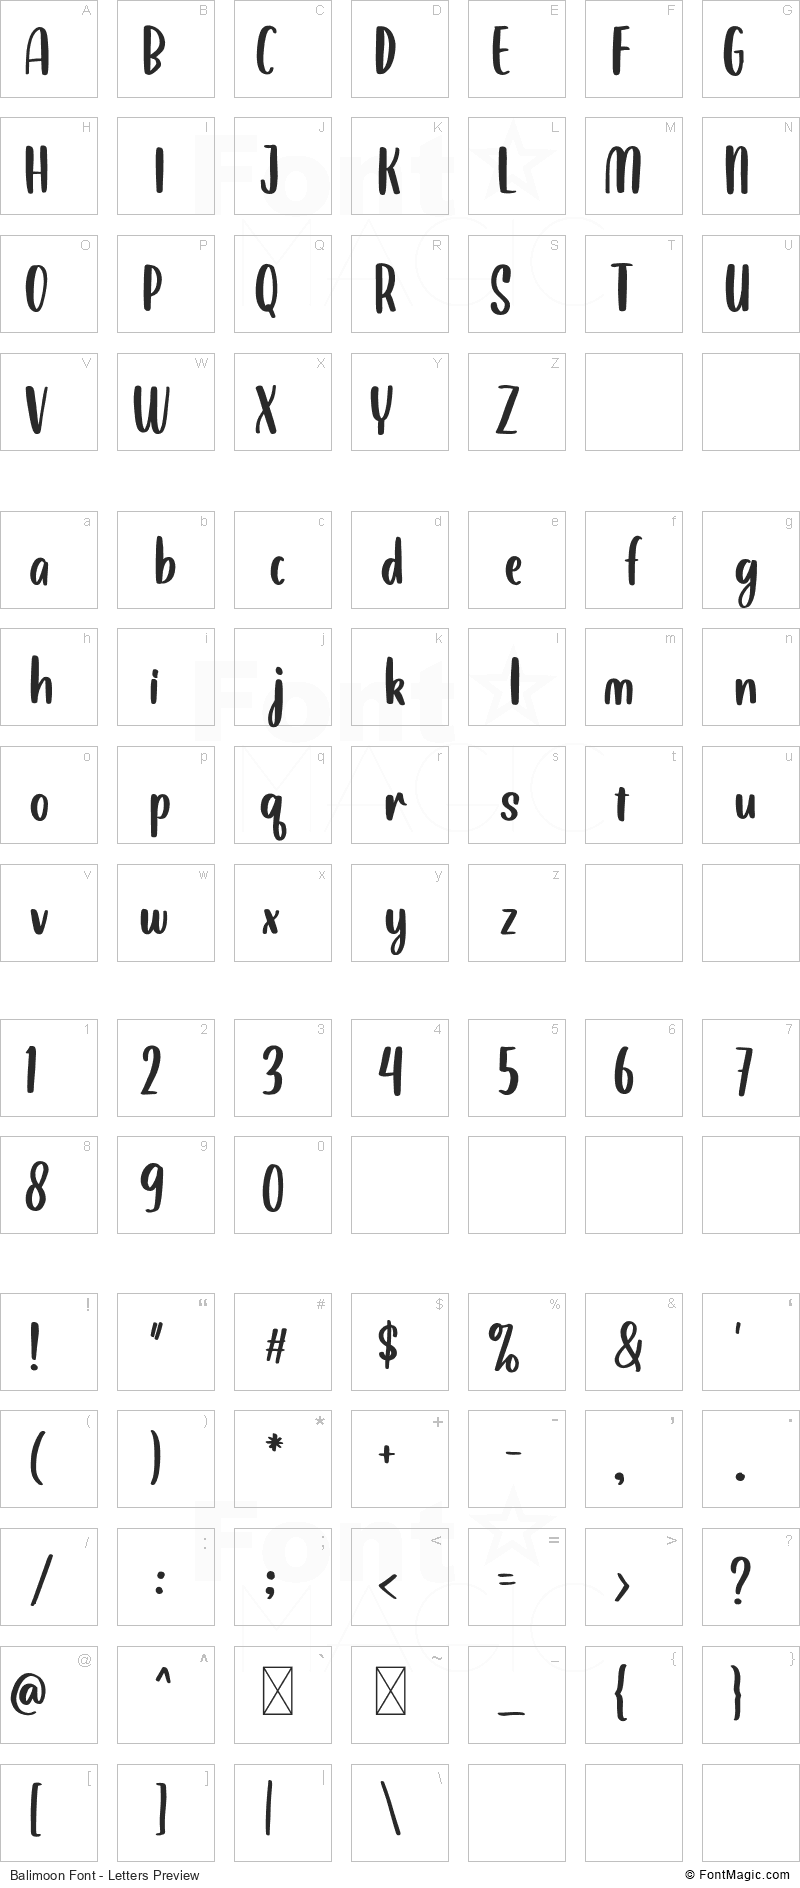 Balimoon Font - All Latters Preview Chart